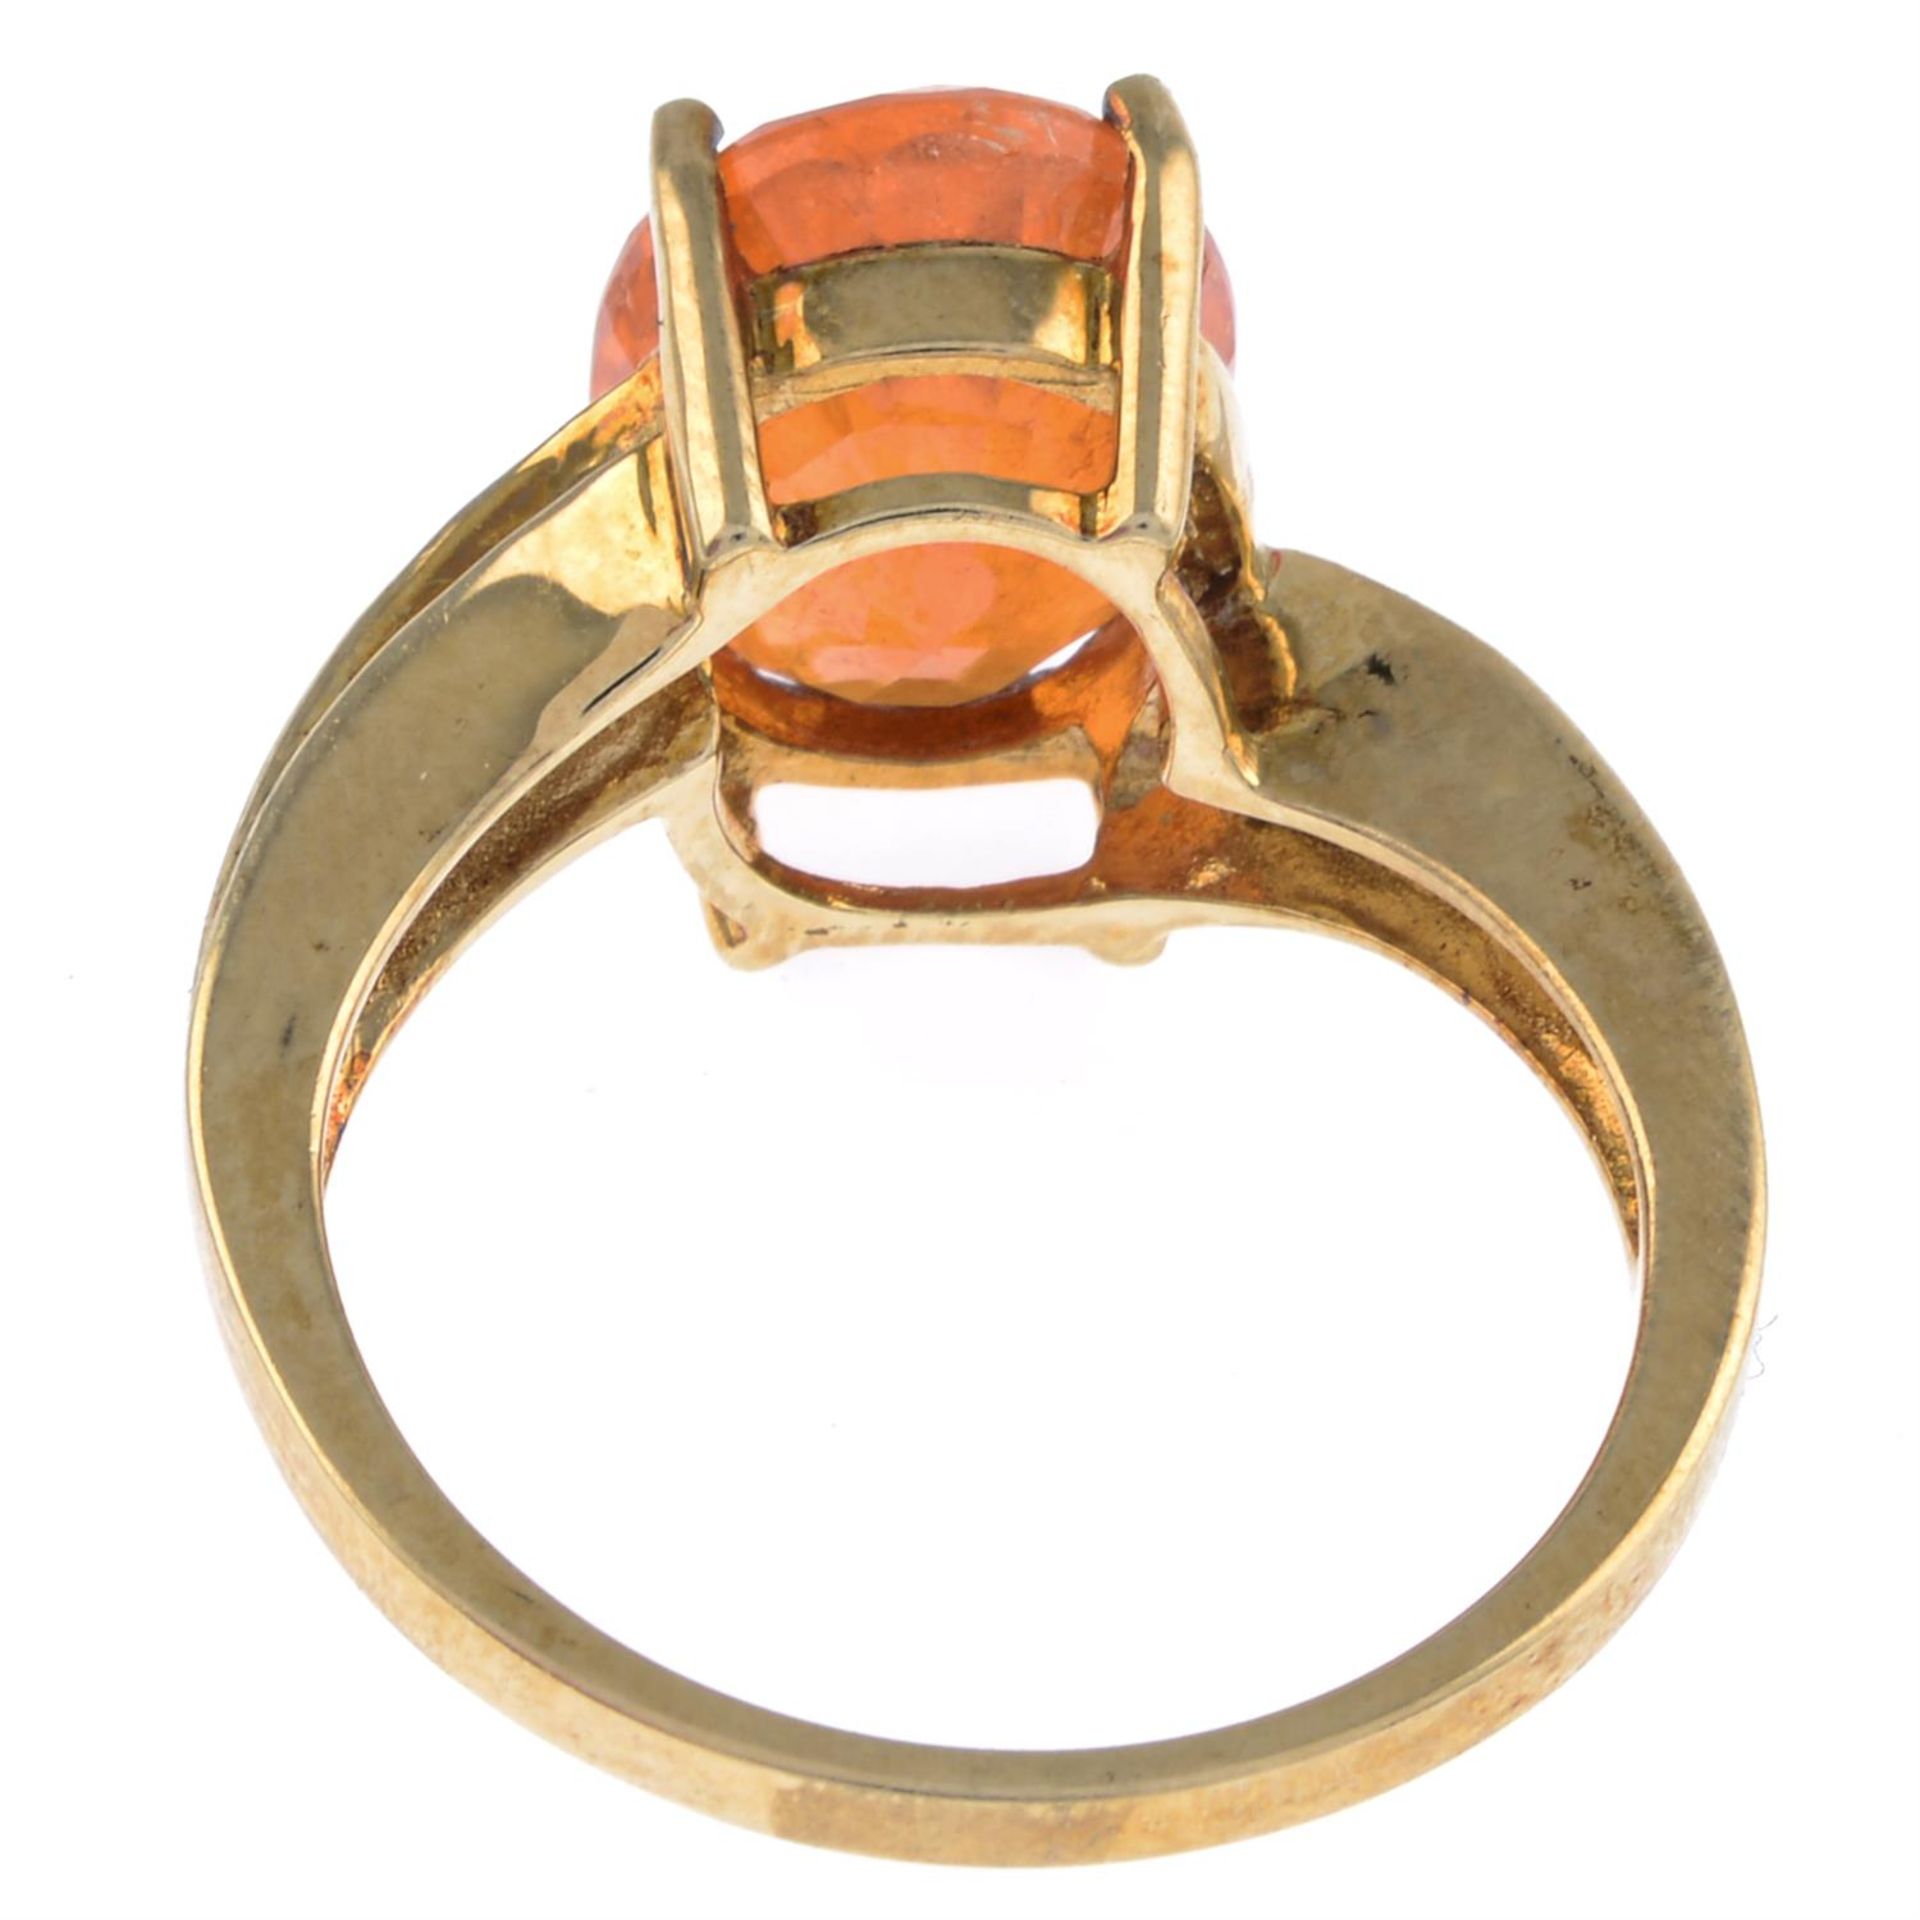 9ct gold fire opal & diamond ring - Image 2 of 2